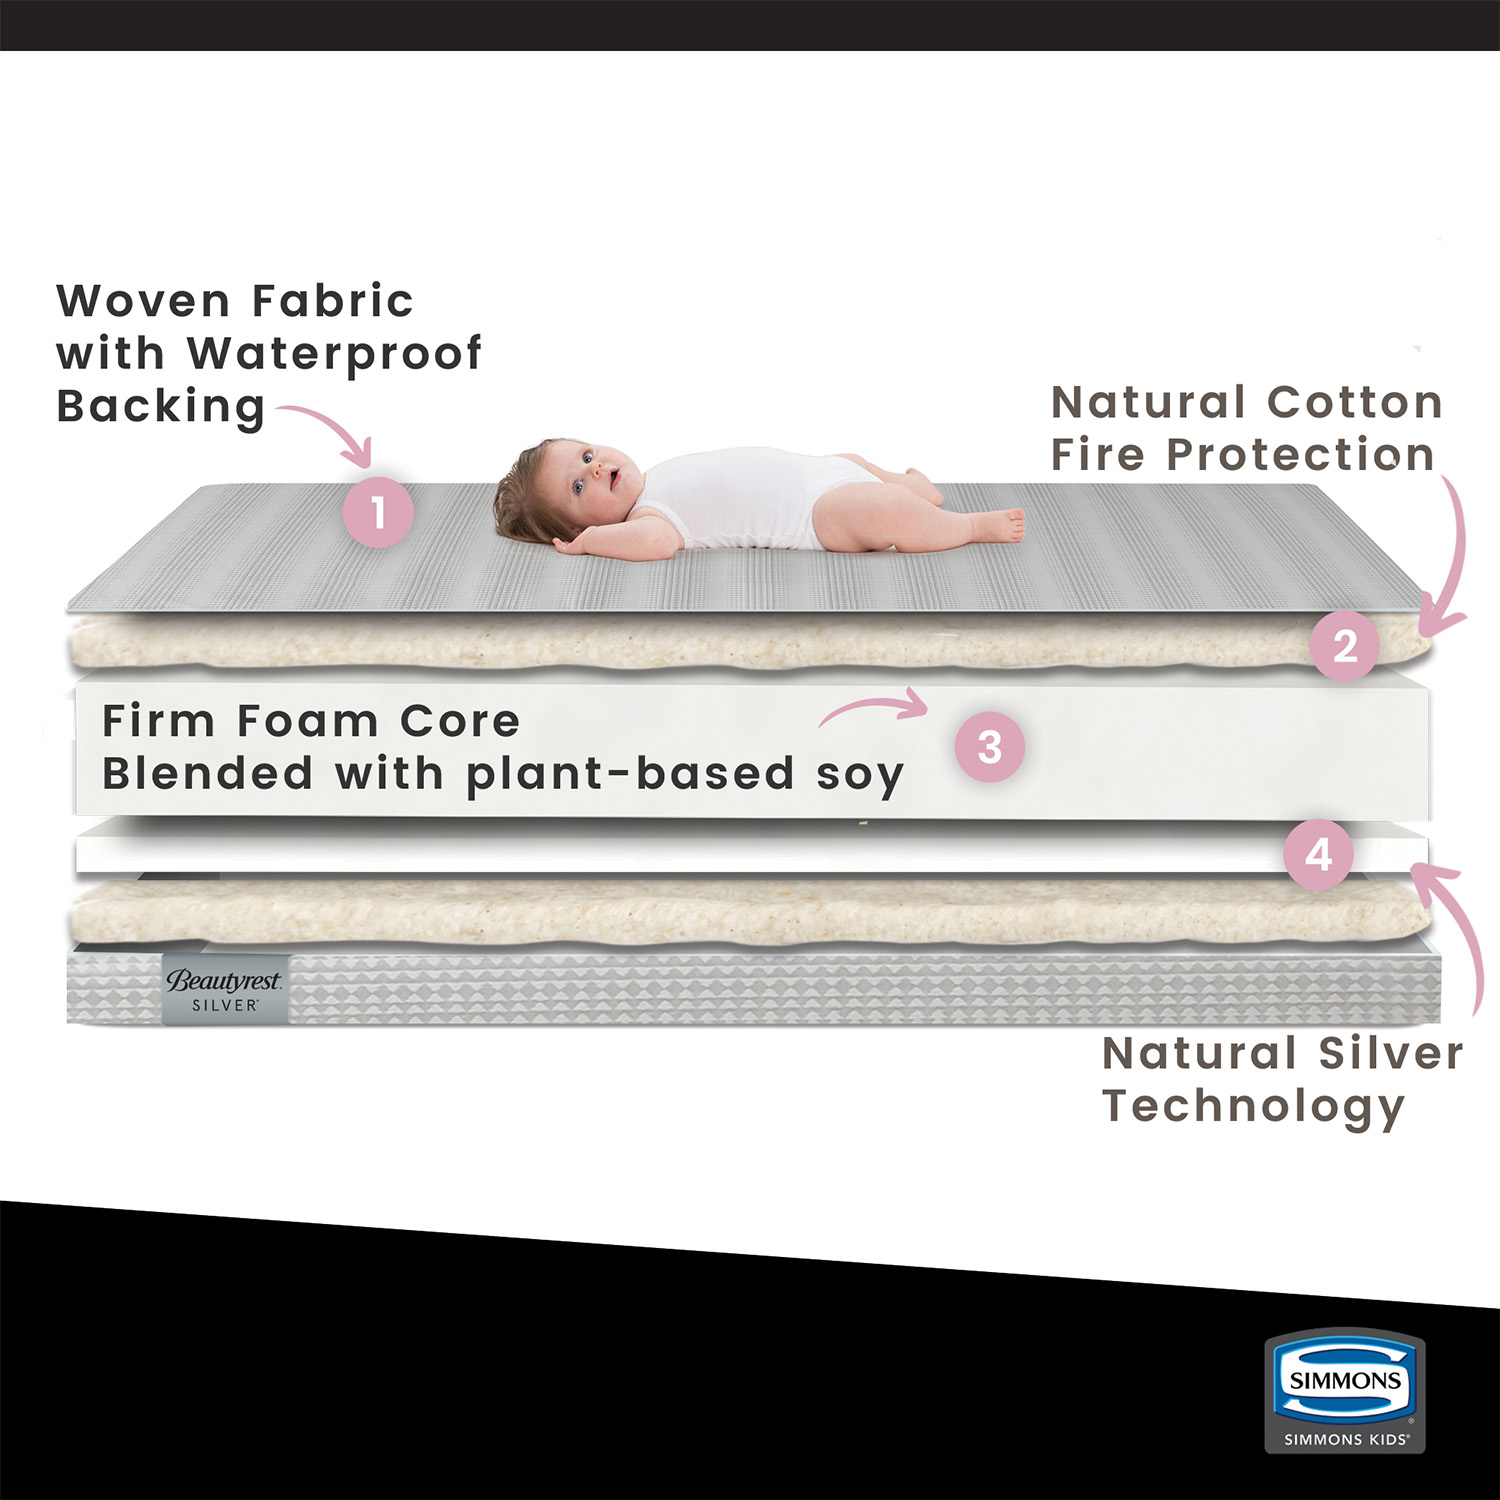 Beautyrest Silver Slumber Nights 2-Stage Antimicrobial Crib & Toddler Mattress, Soy Foam Core - image 4 of 10